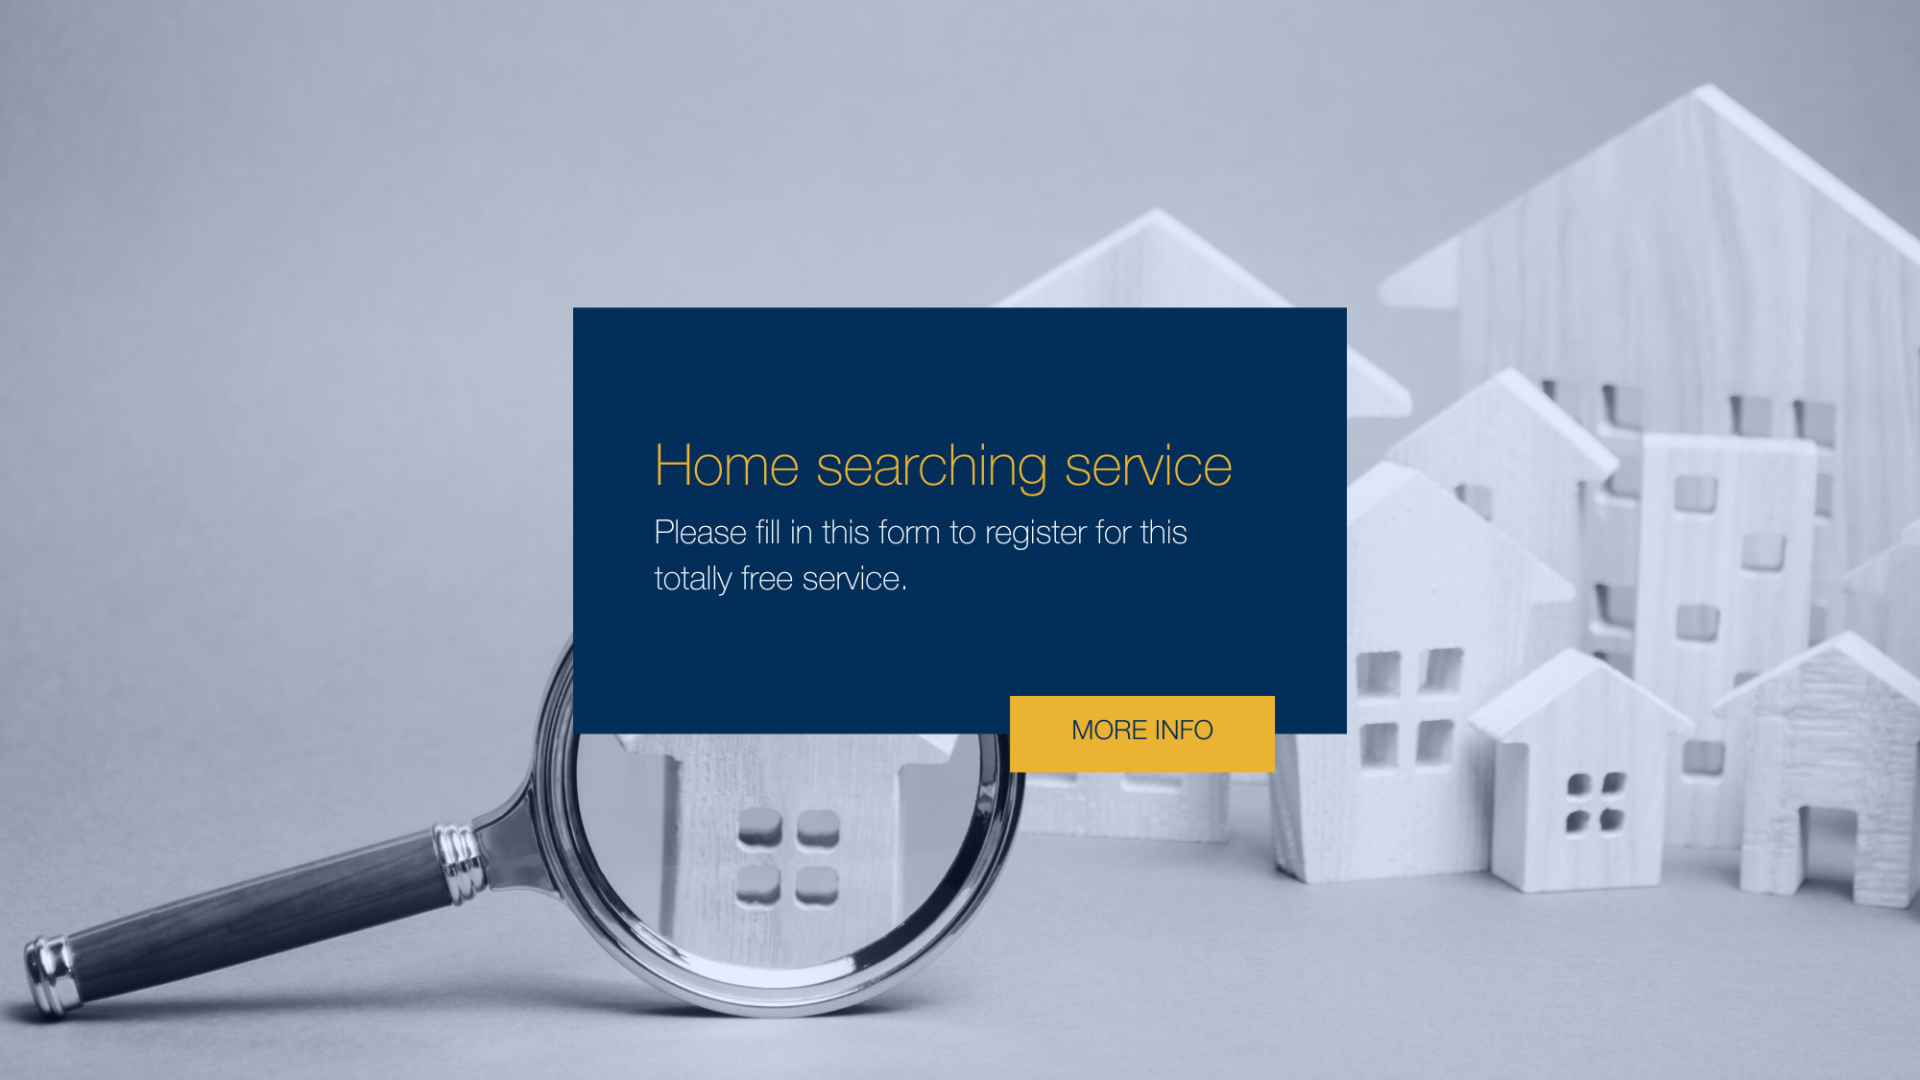 Home searching service